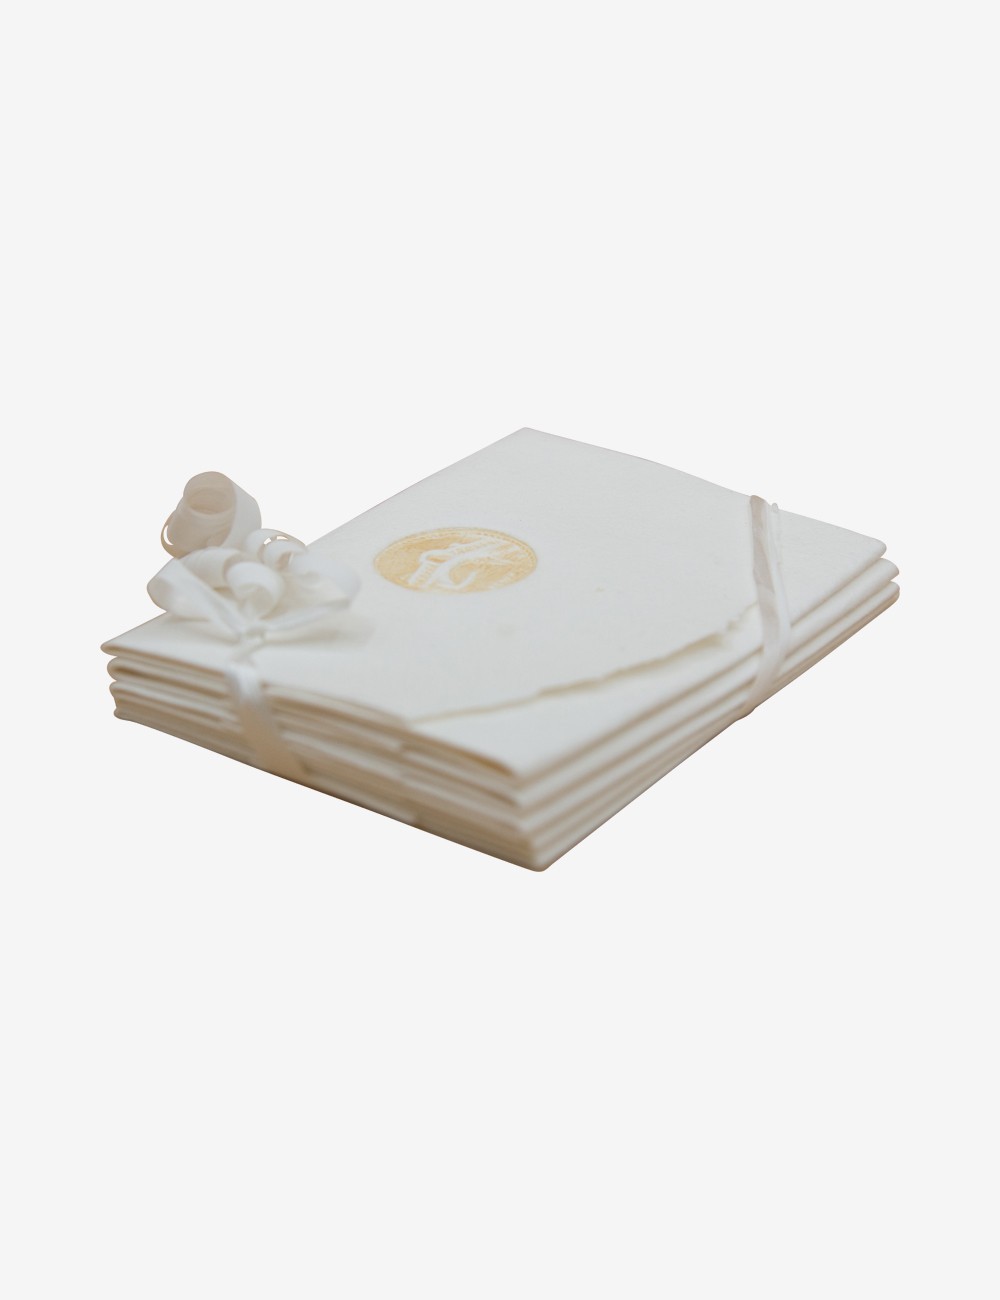 Set of envelopes / wedding invitations round: Cotton paper envelope with  embossed print